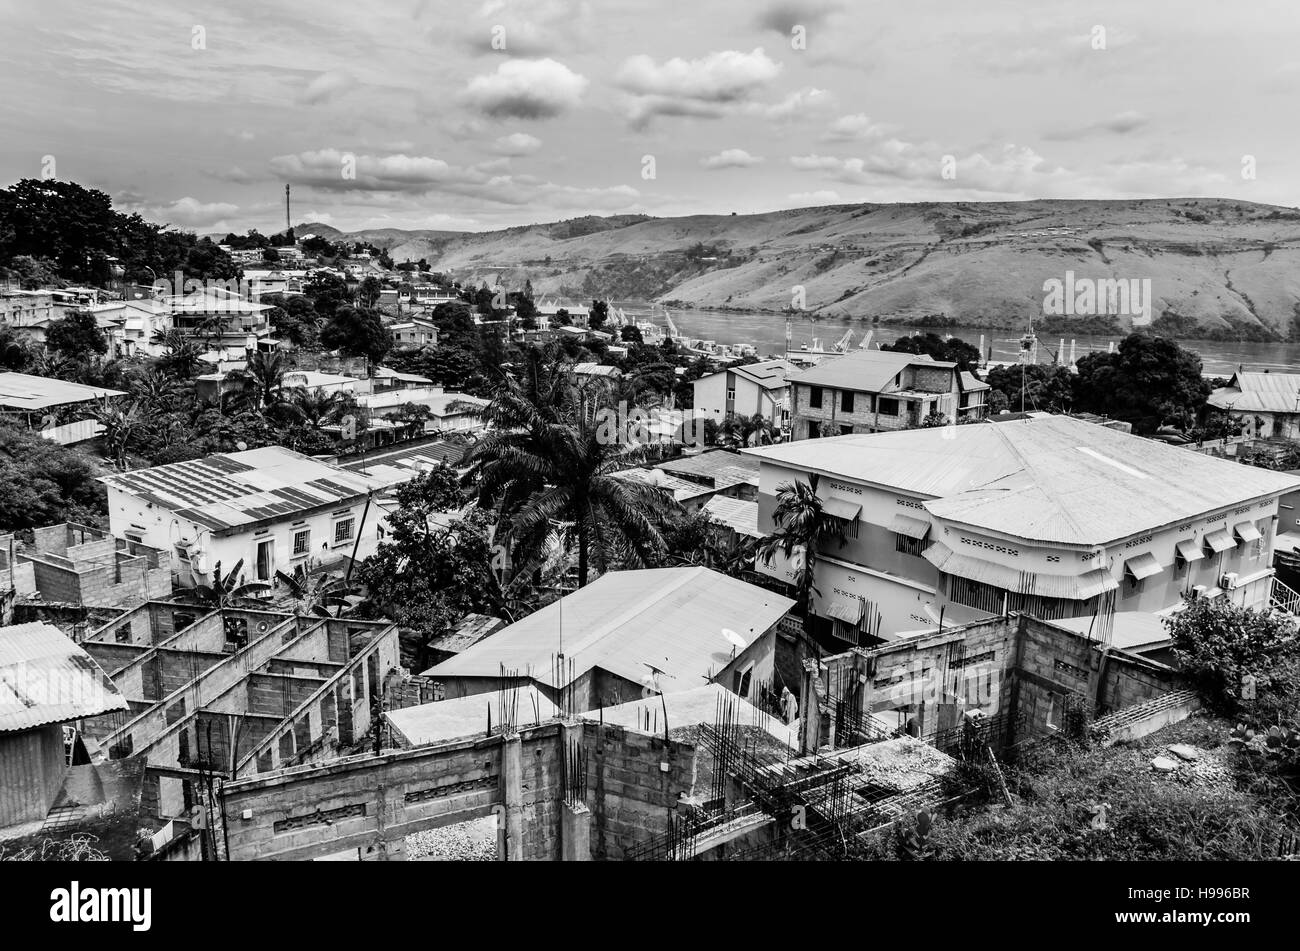 The Congolese town Matadi at the Congo river in black and white. The city is built over several hills with wildly varying architecture. Stock Photo